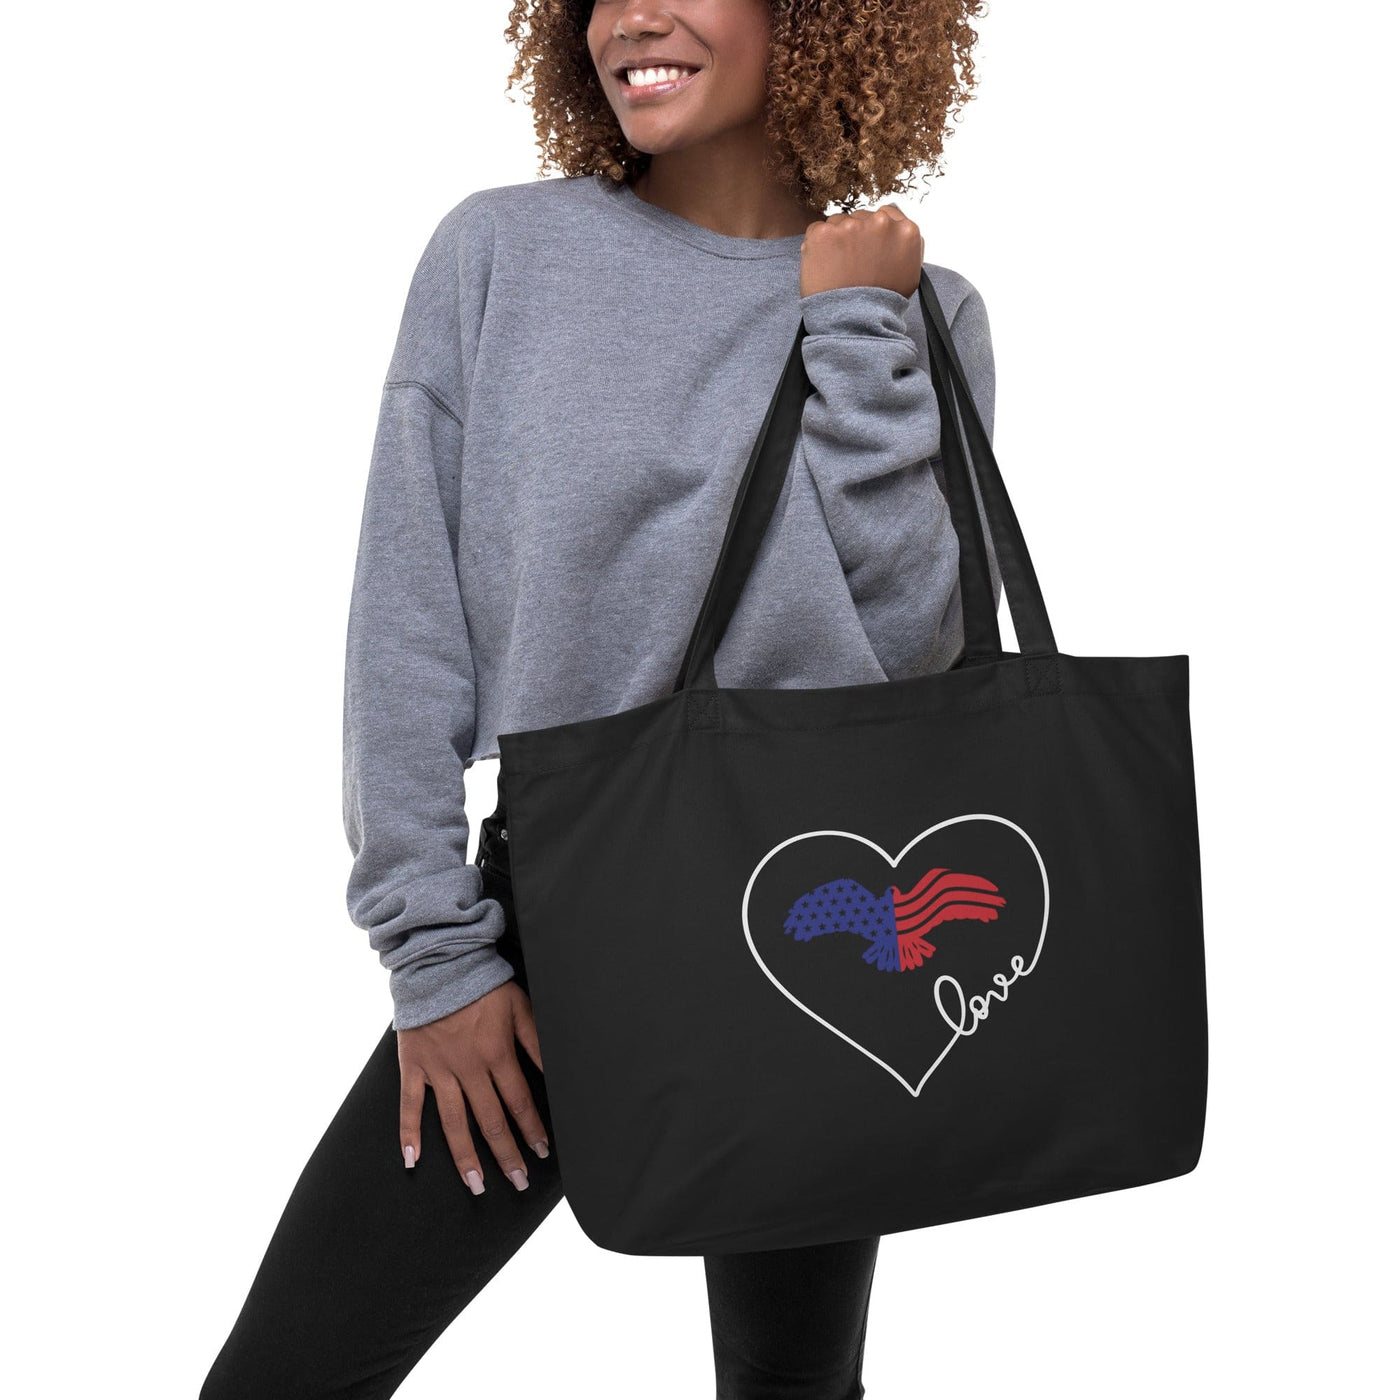 Large Black Tote Bag - Red Blue White Eagle Heart Inspirational Print - Bags